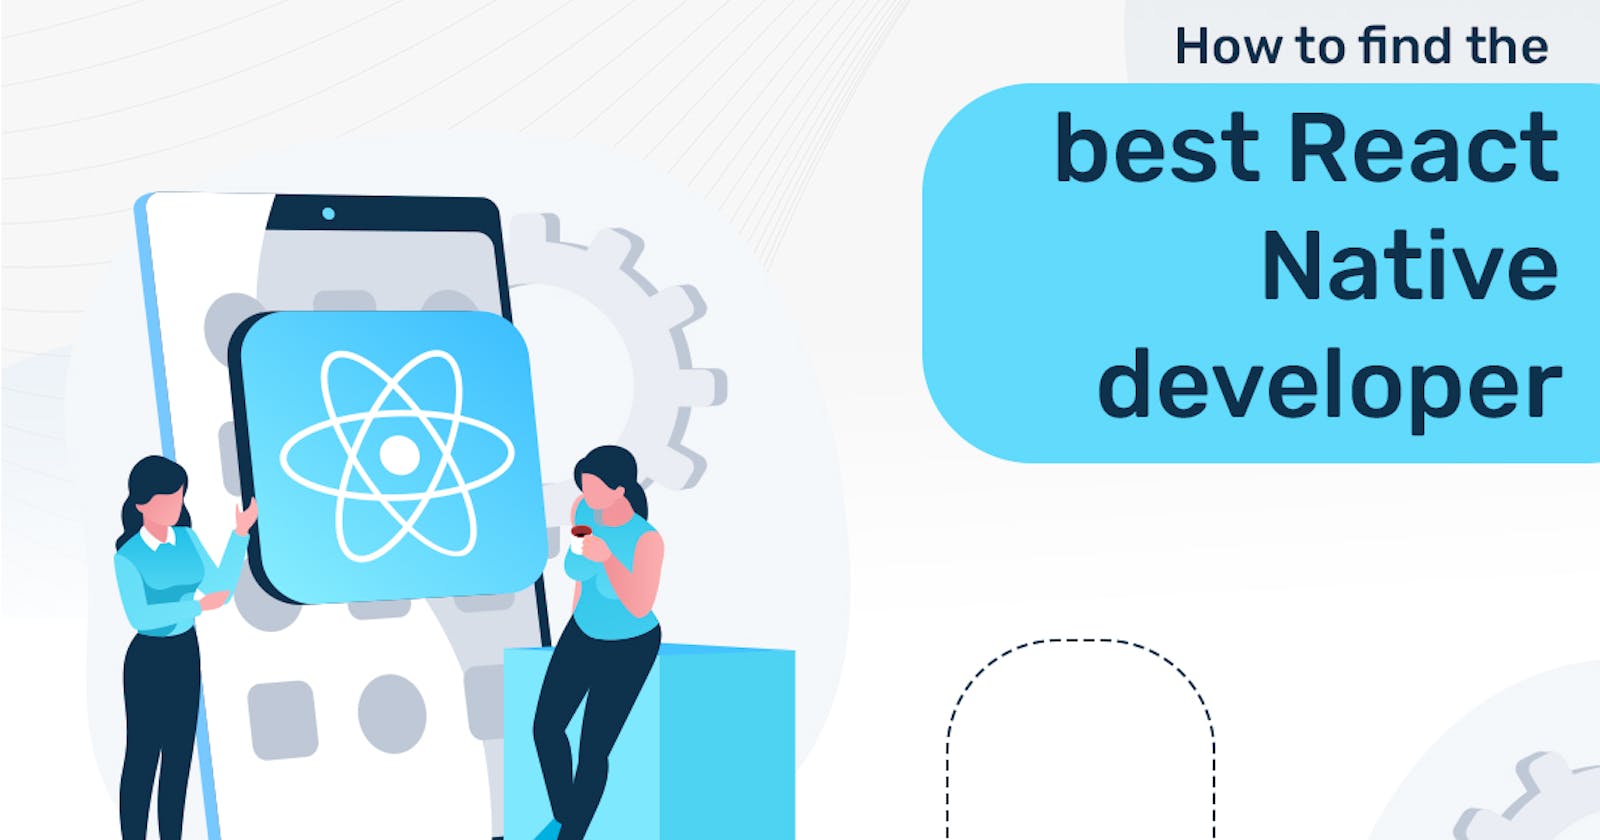 How to find the best React Native developer?